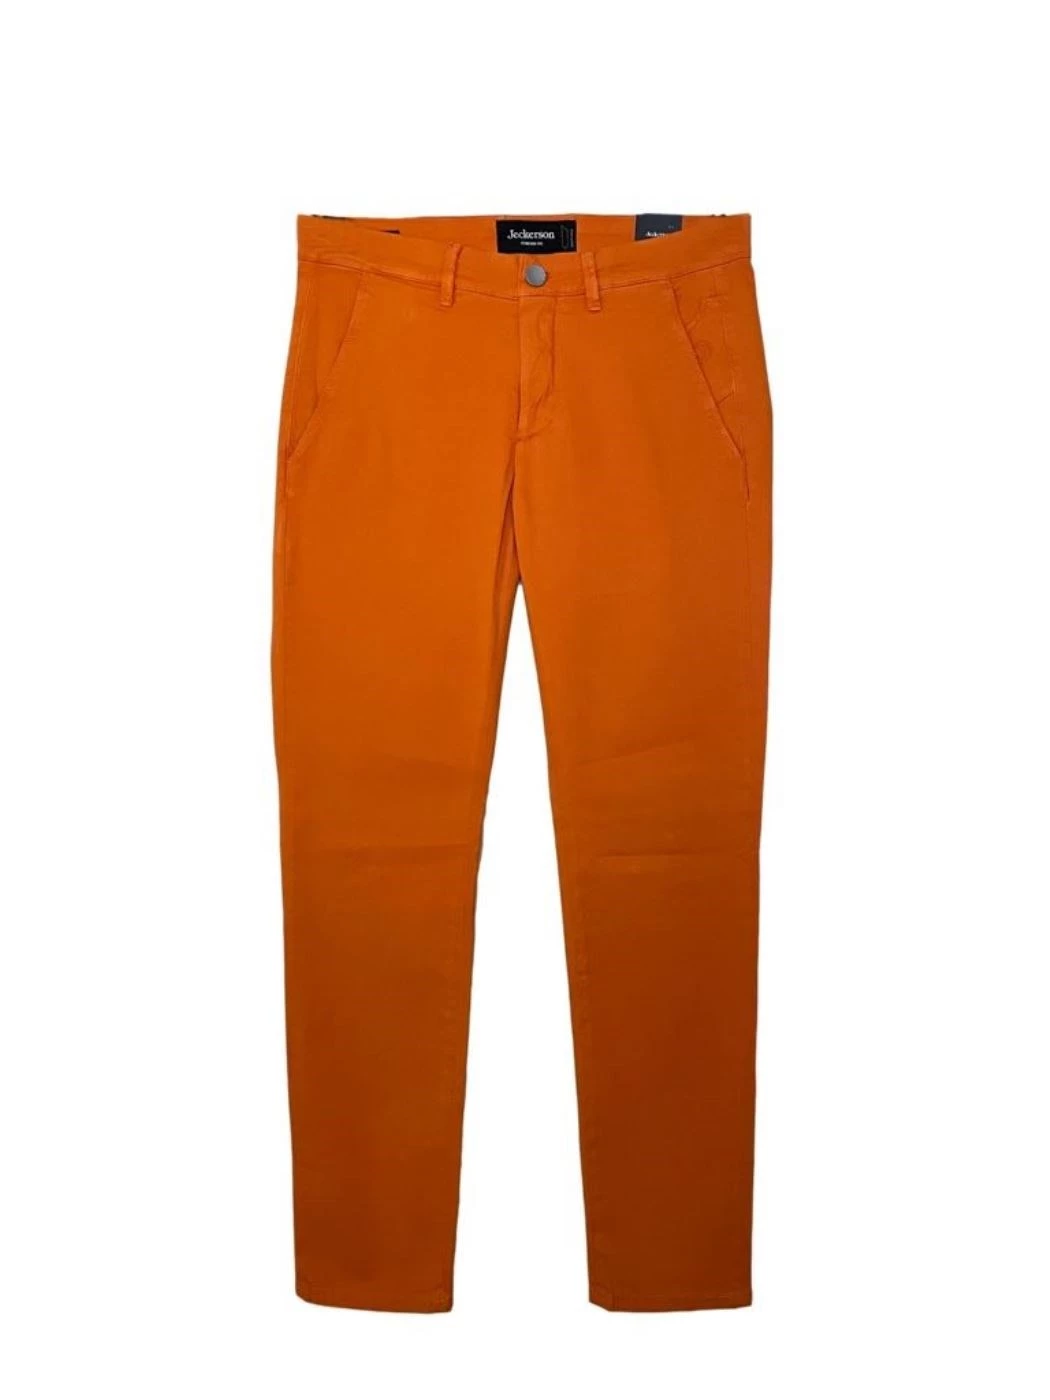 Trousers without Jeckerson patch